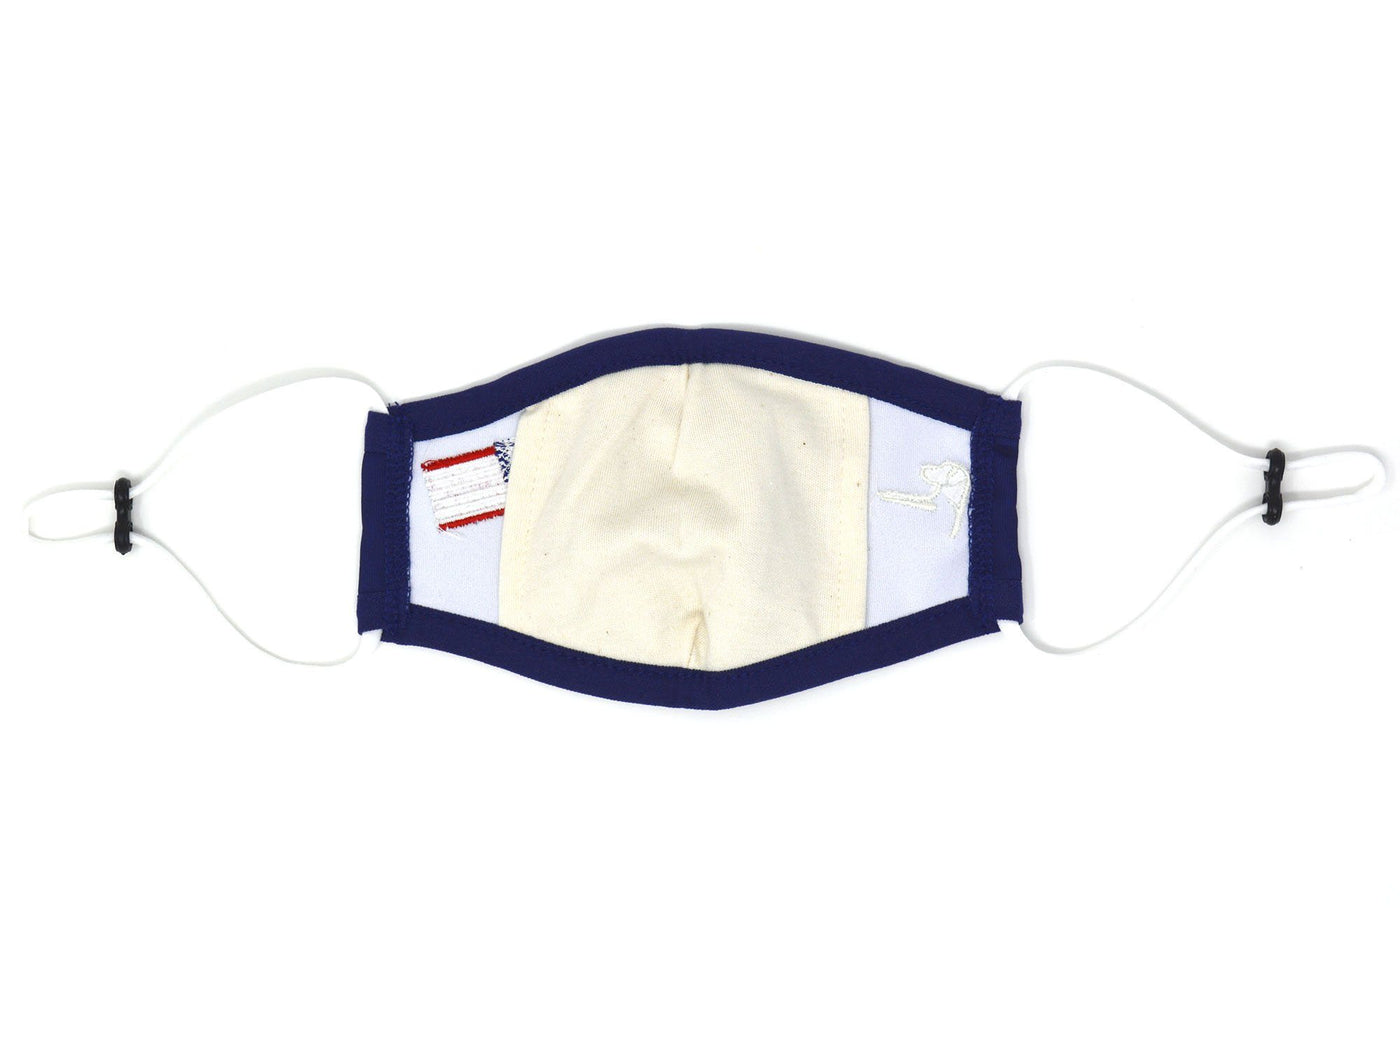 The Old Glory Kid's Mask